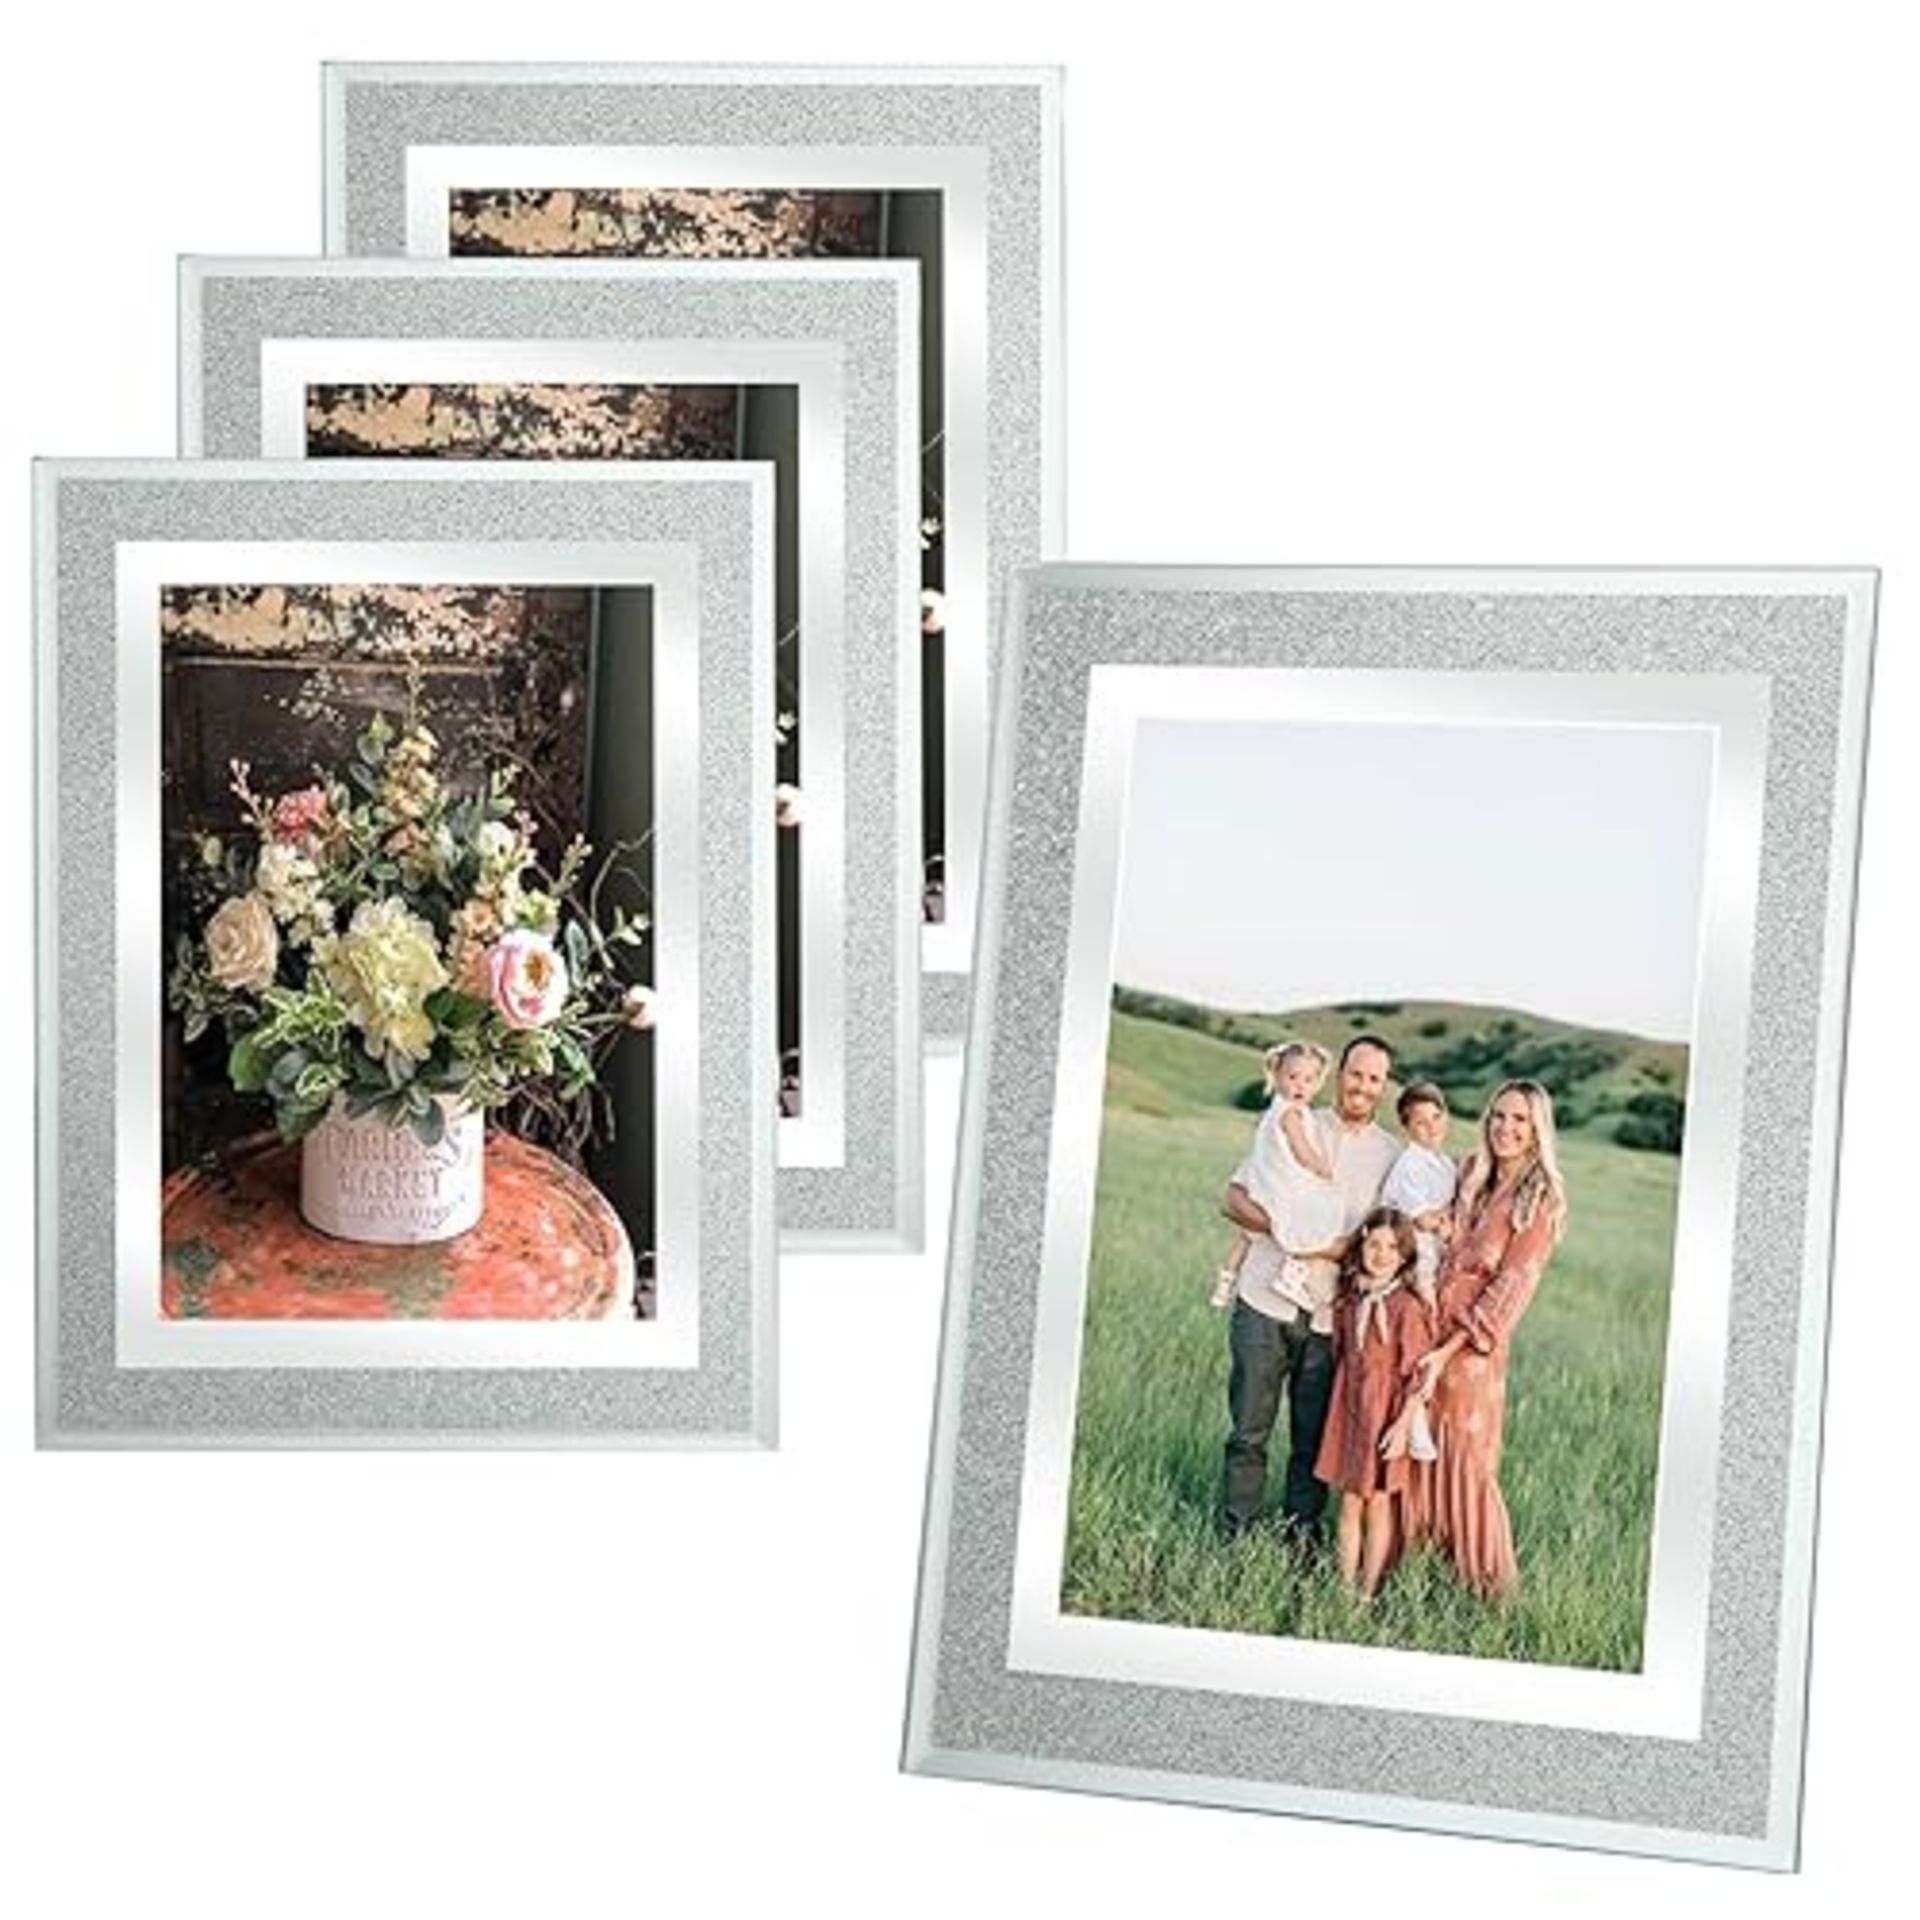 ASelected 6X4 Glass Photo Picture Frames For Wedding Photos,Family Photos And Home Decoration,Frees